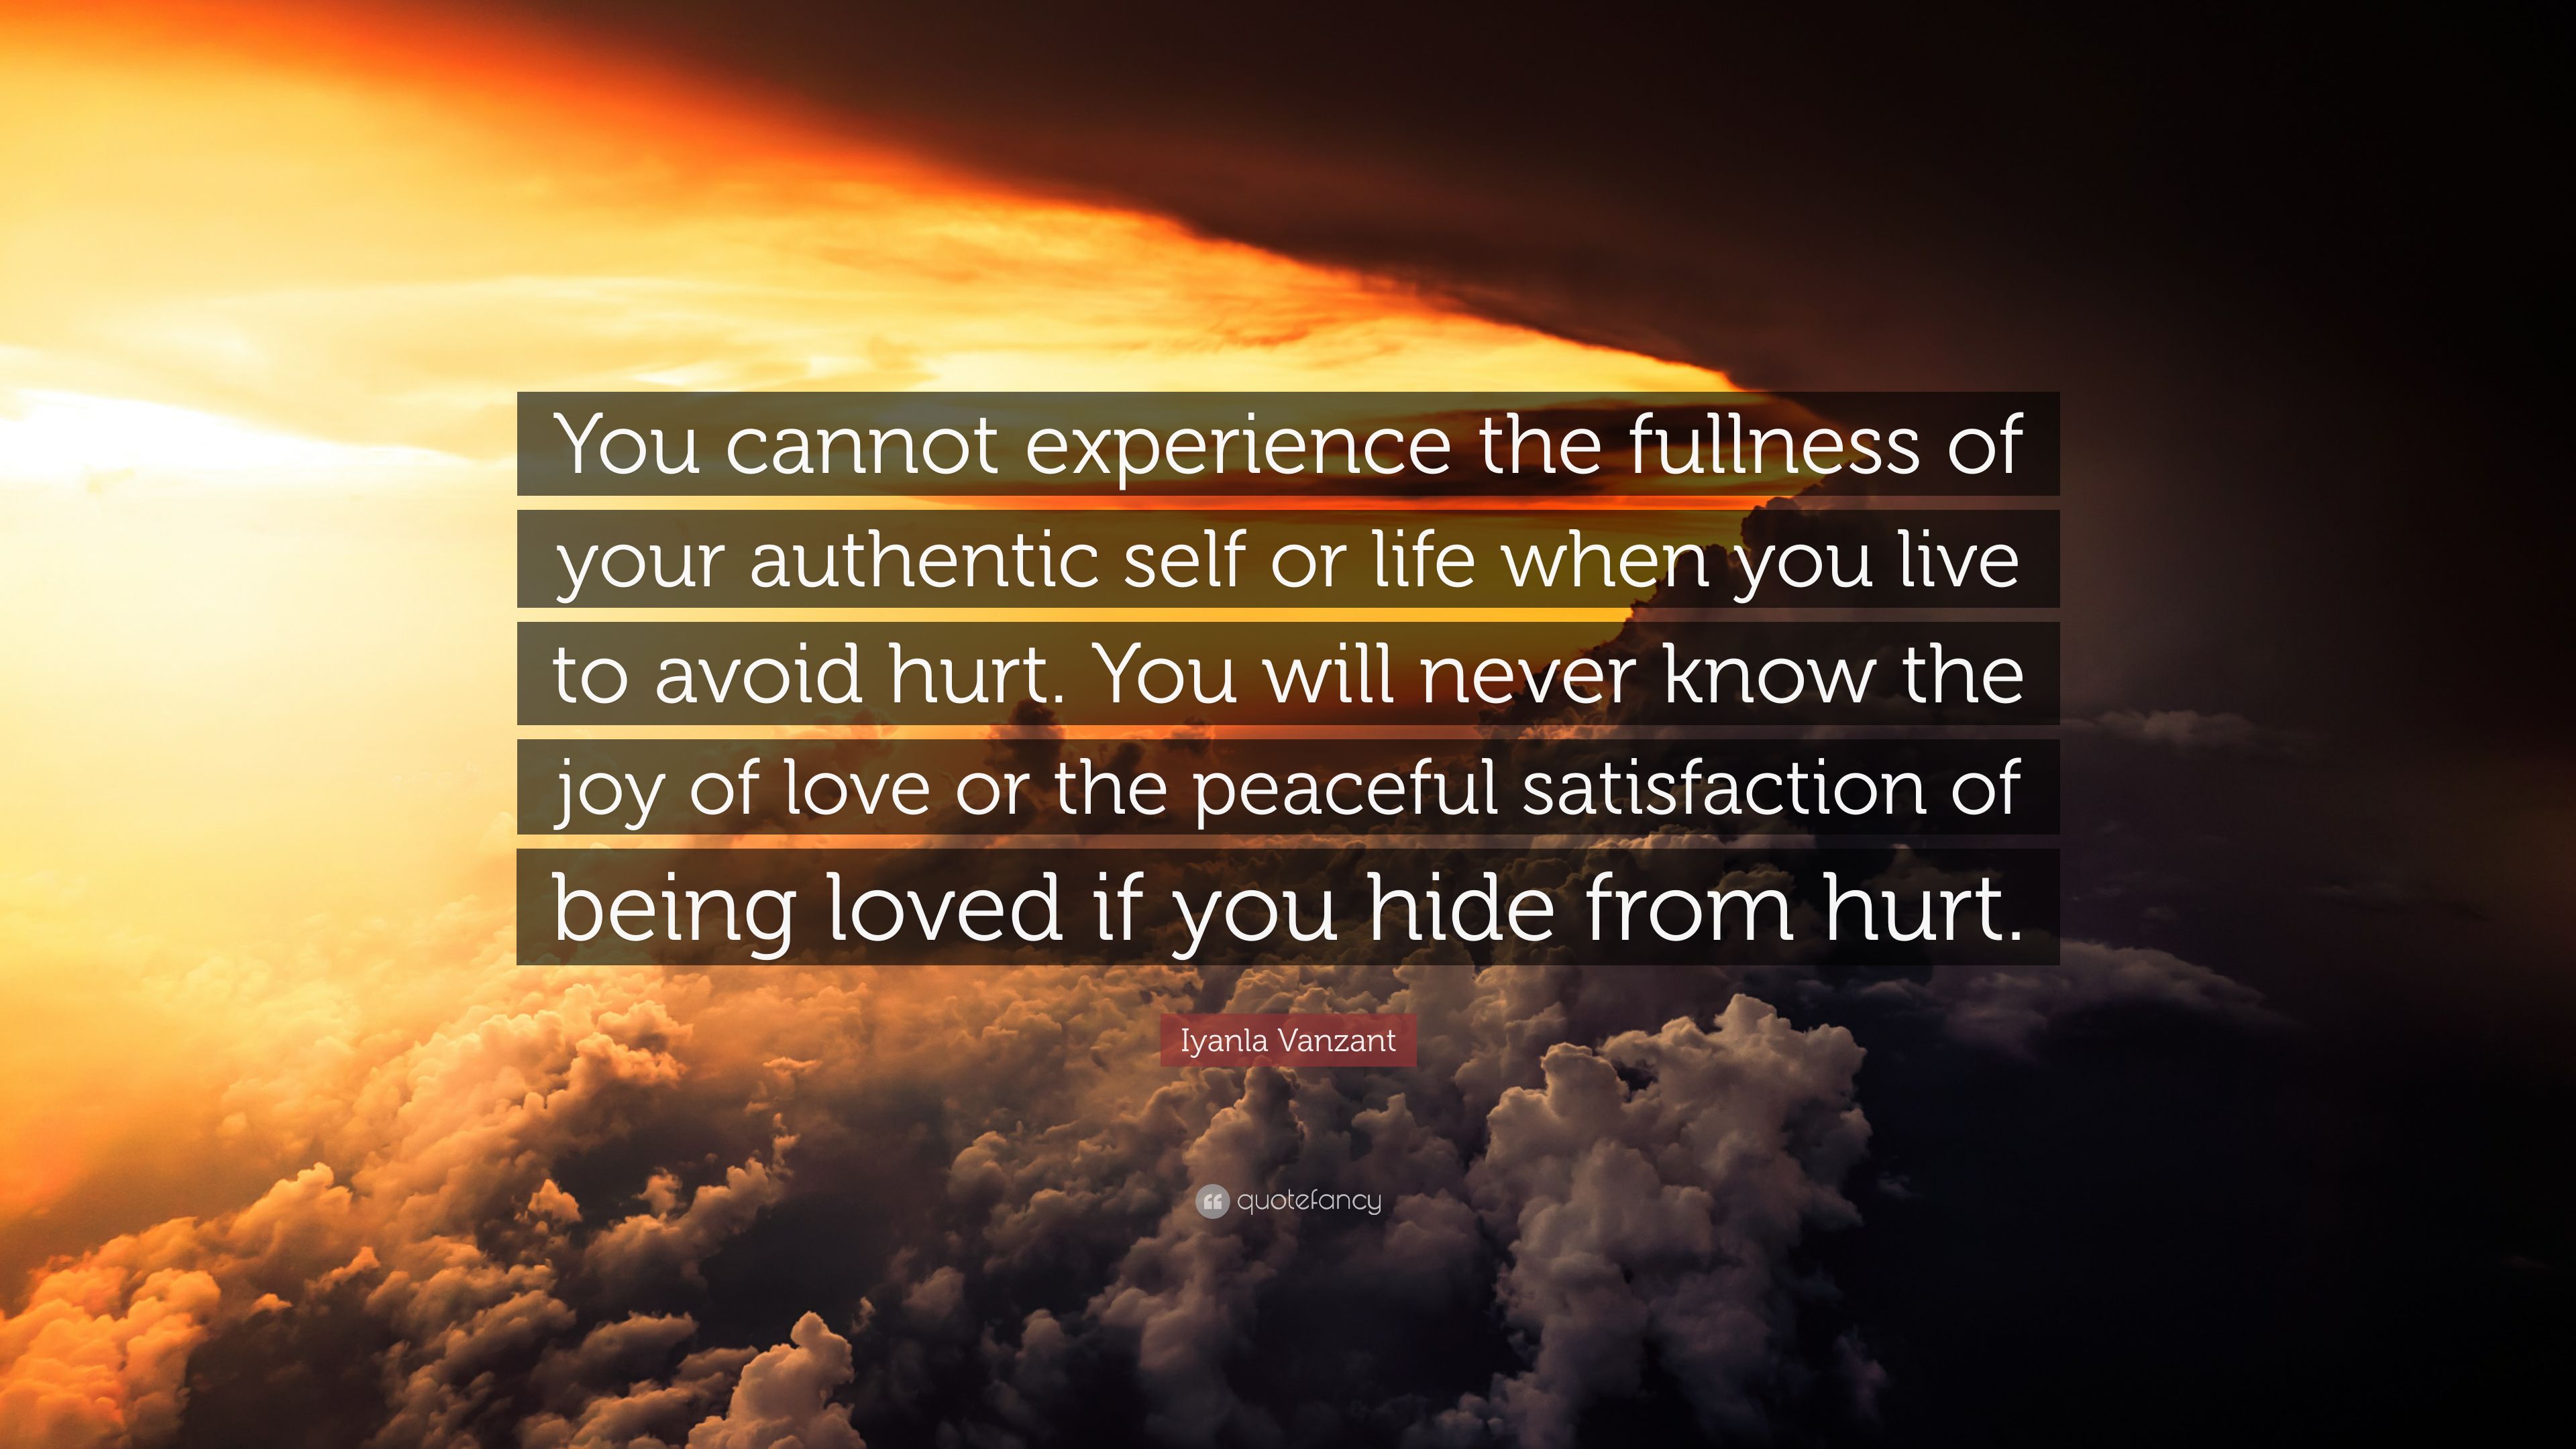 Iyanla Vanzant Quote: “You cannot experience the fullness of your authentic self or life when you live to avoid hurt. You will never know the j.” (7 wallpaper)